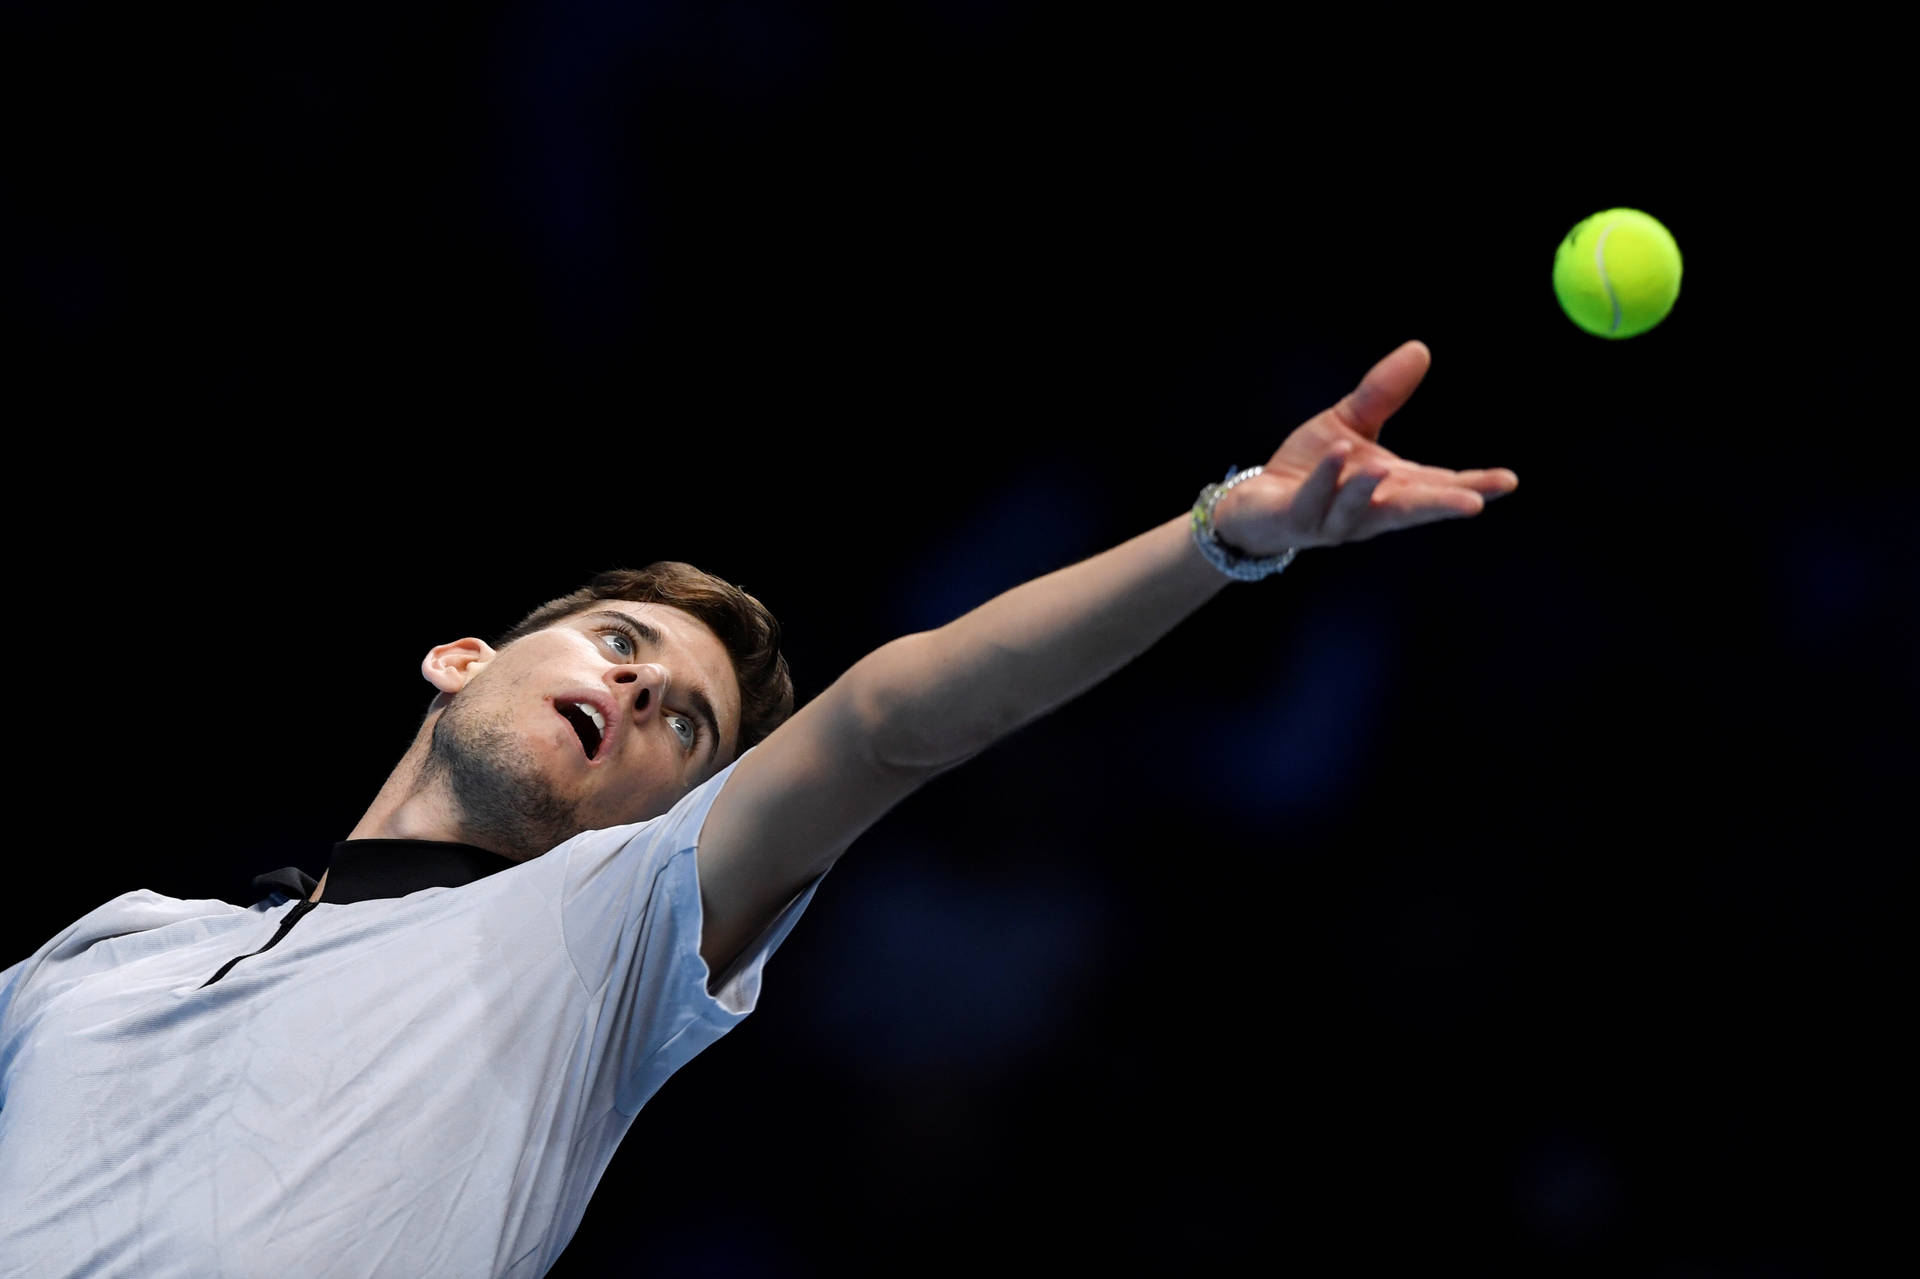 Caption: Professional Tennis Player Dominic Thiem In Action Background